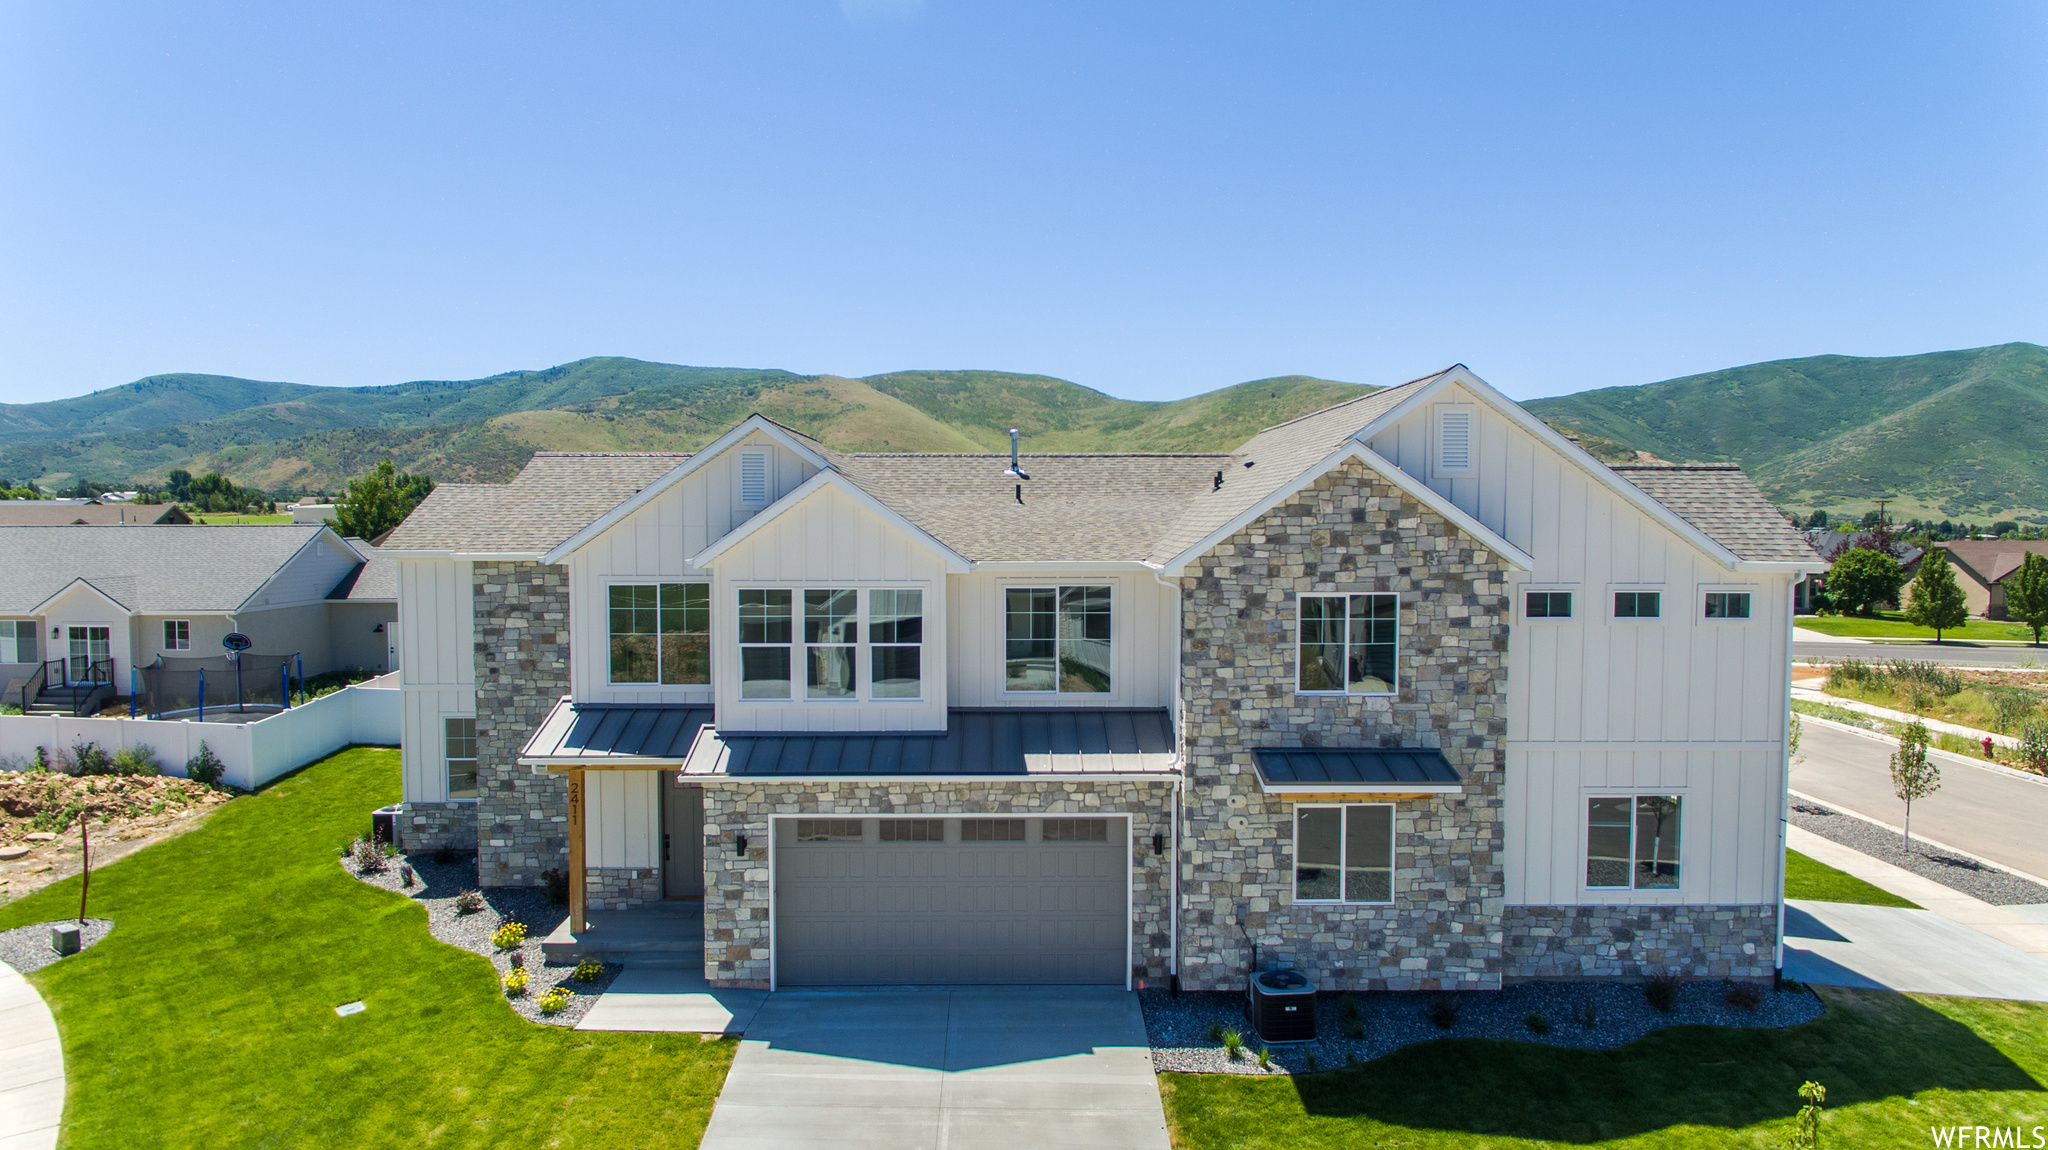 2411 S ORCHARD, Heber City, Utah 84032, 5 Bedrooms Bedrooms, ,Residential,For sale,ORCHARD,1890439